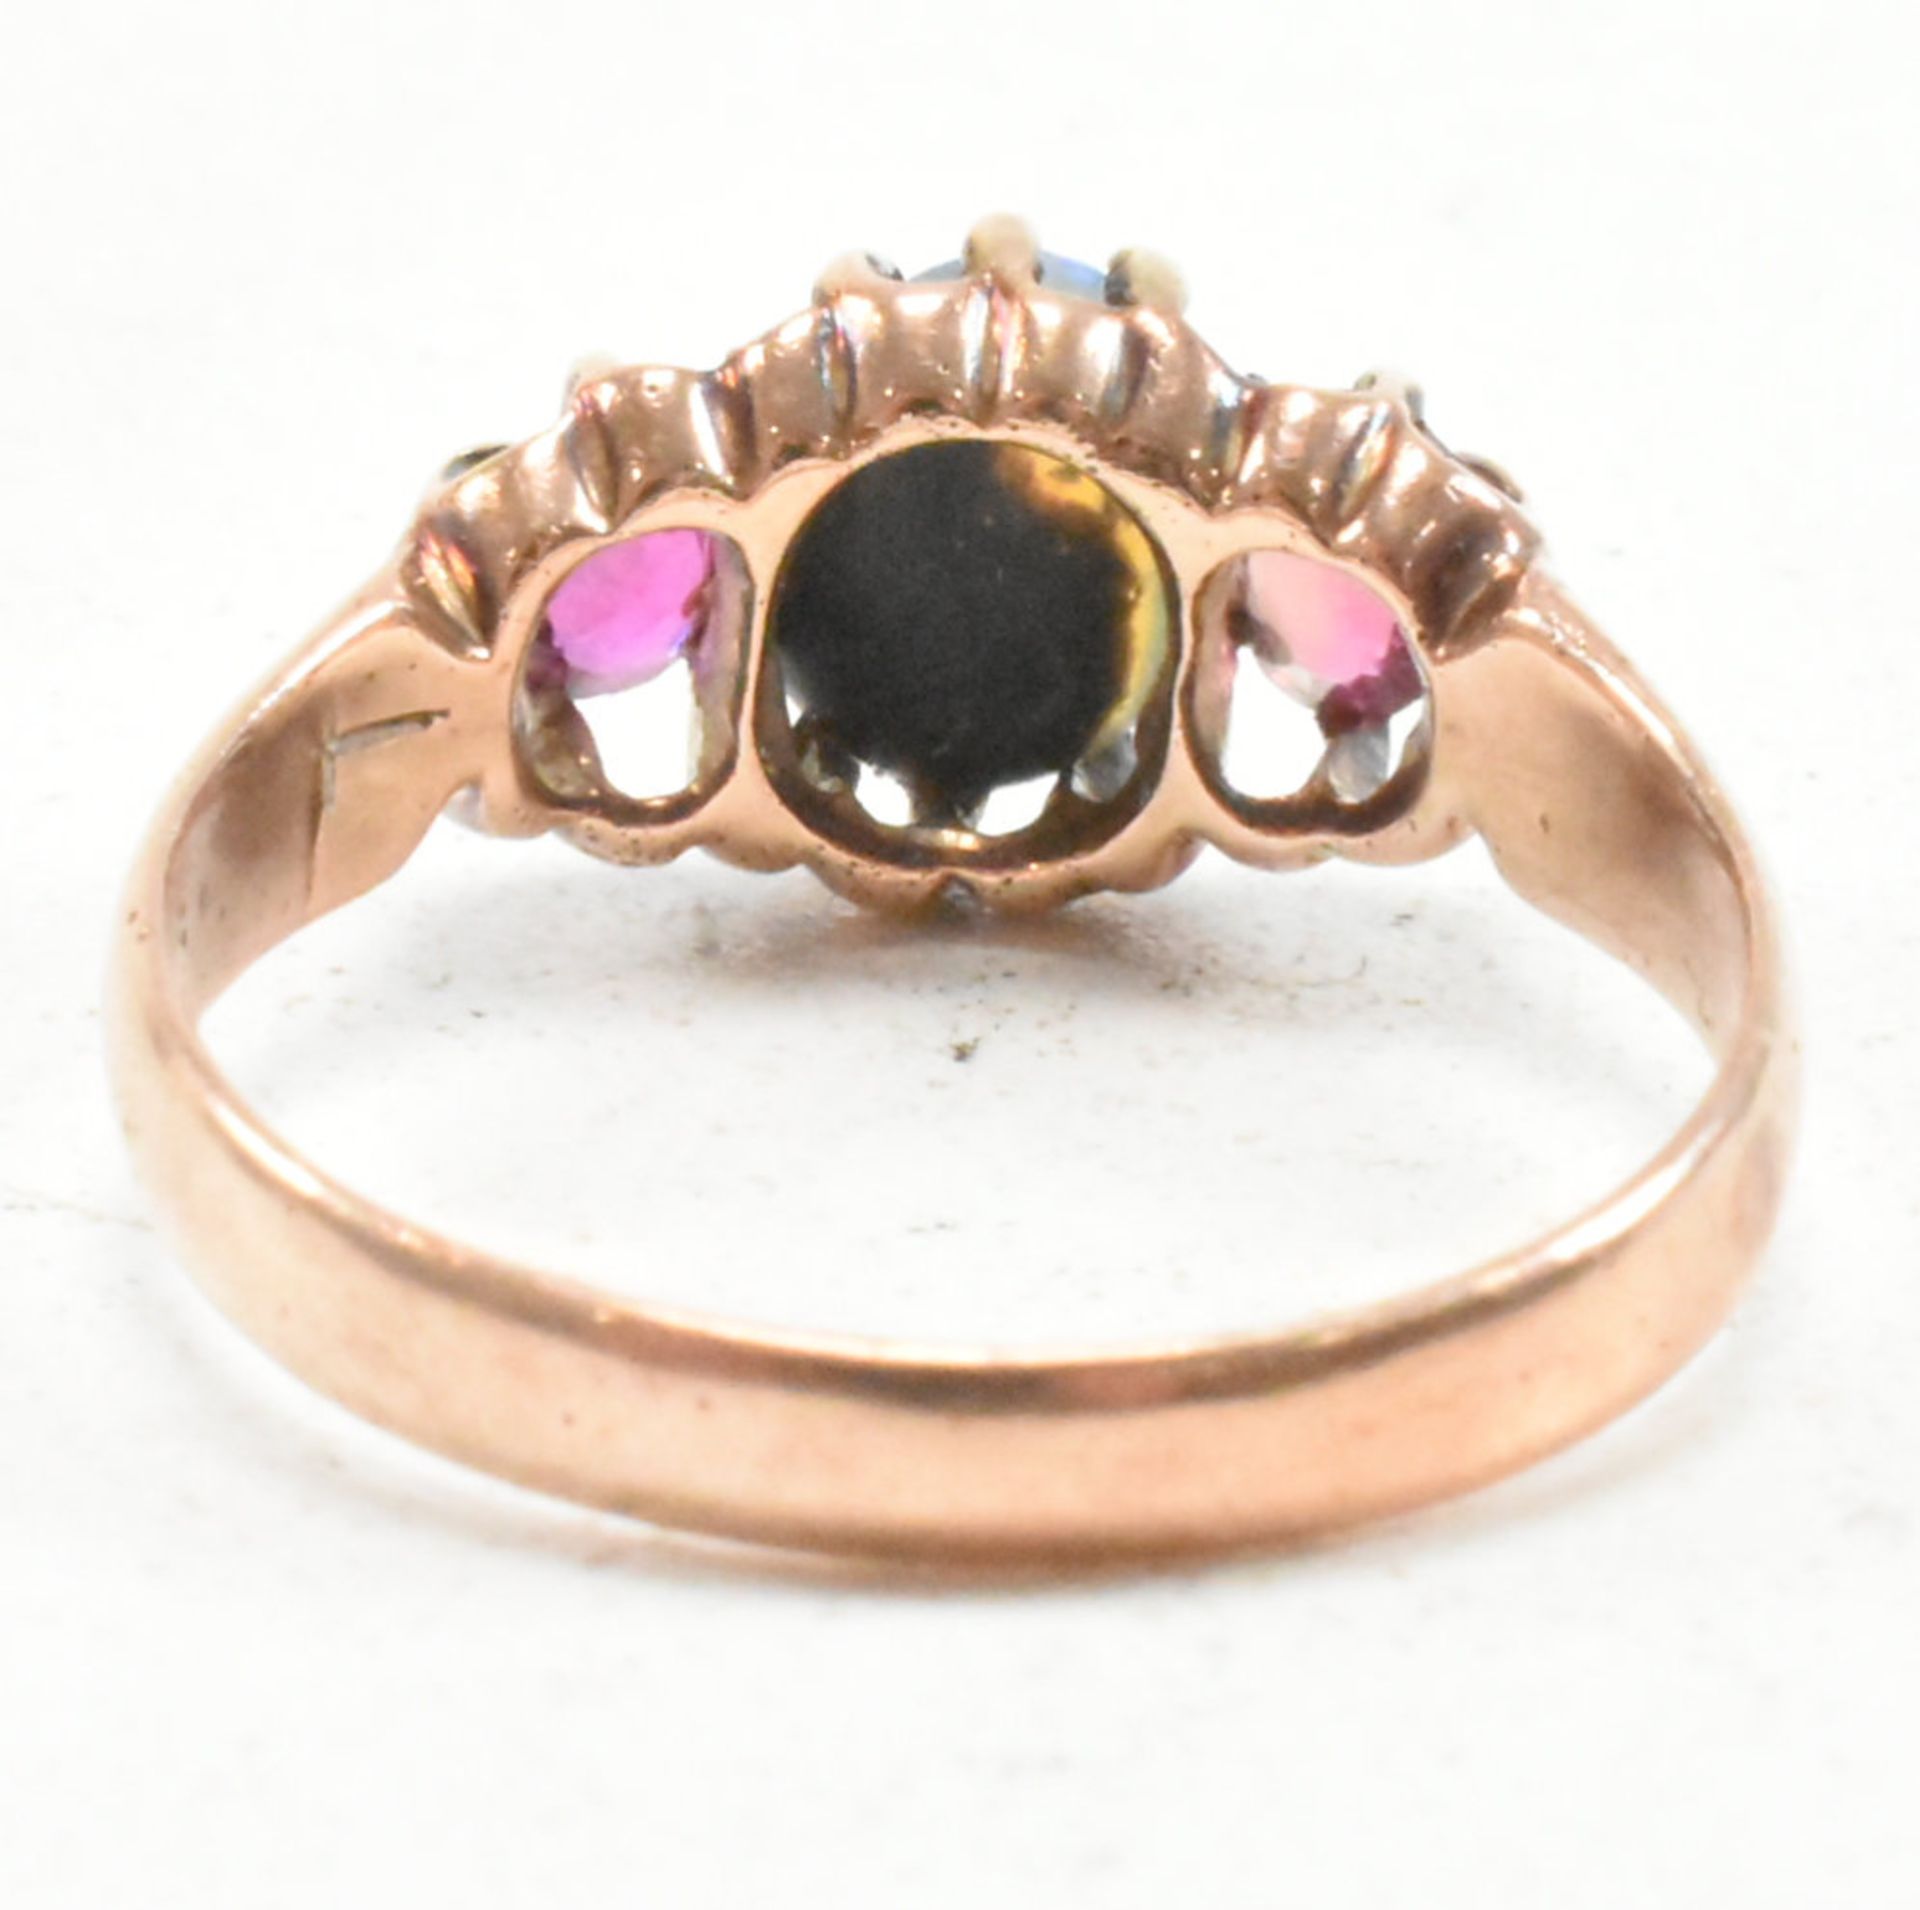 EARLY 20TH CENTURY GOLD OPAL & RUBY RING - Image 4 of 7